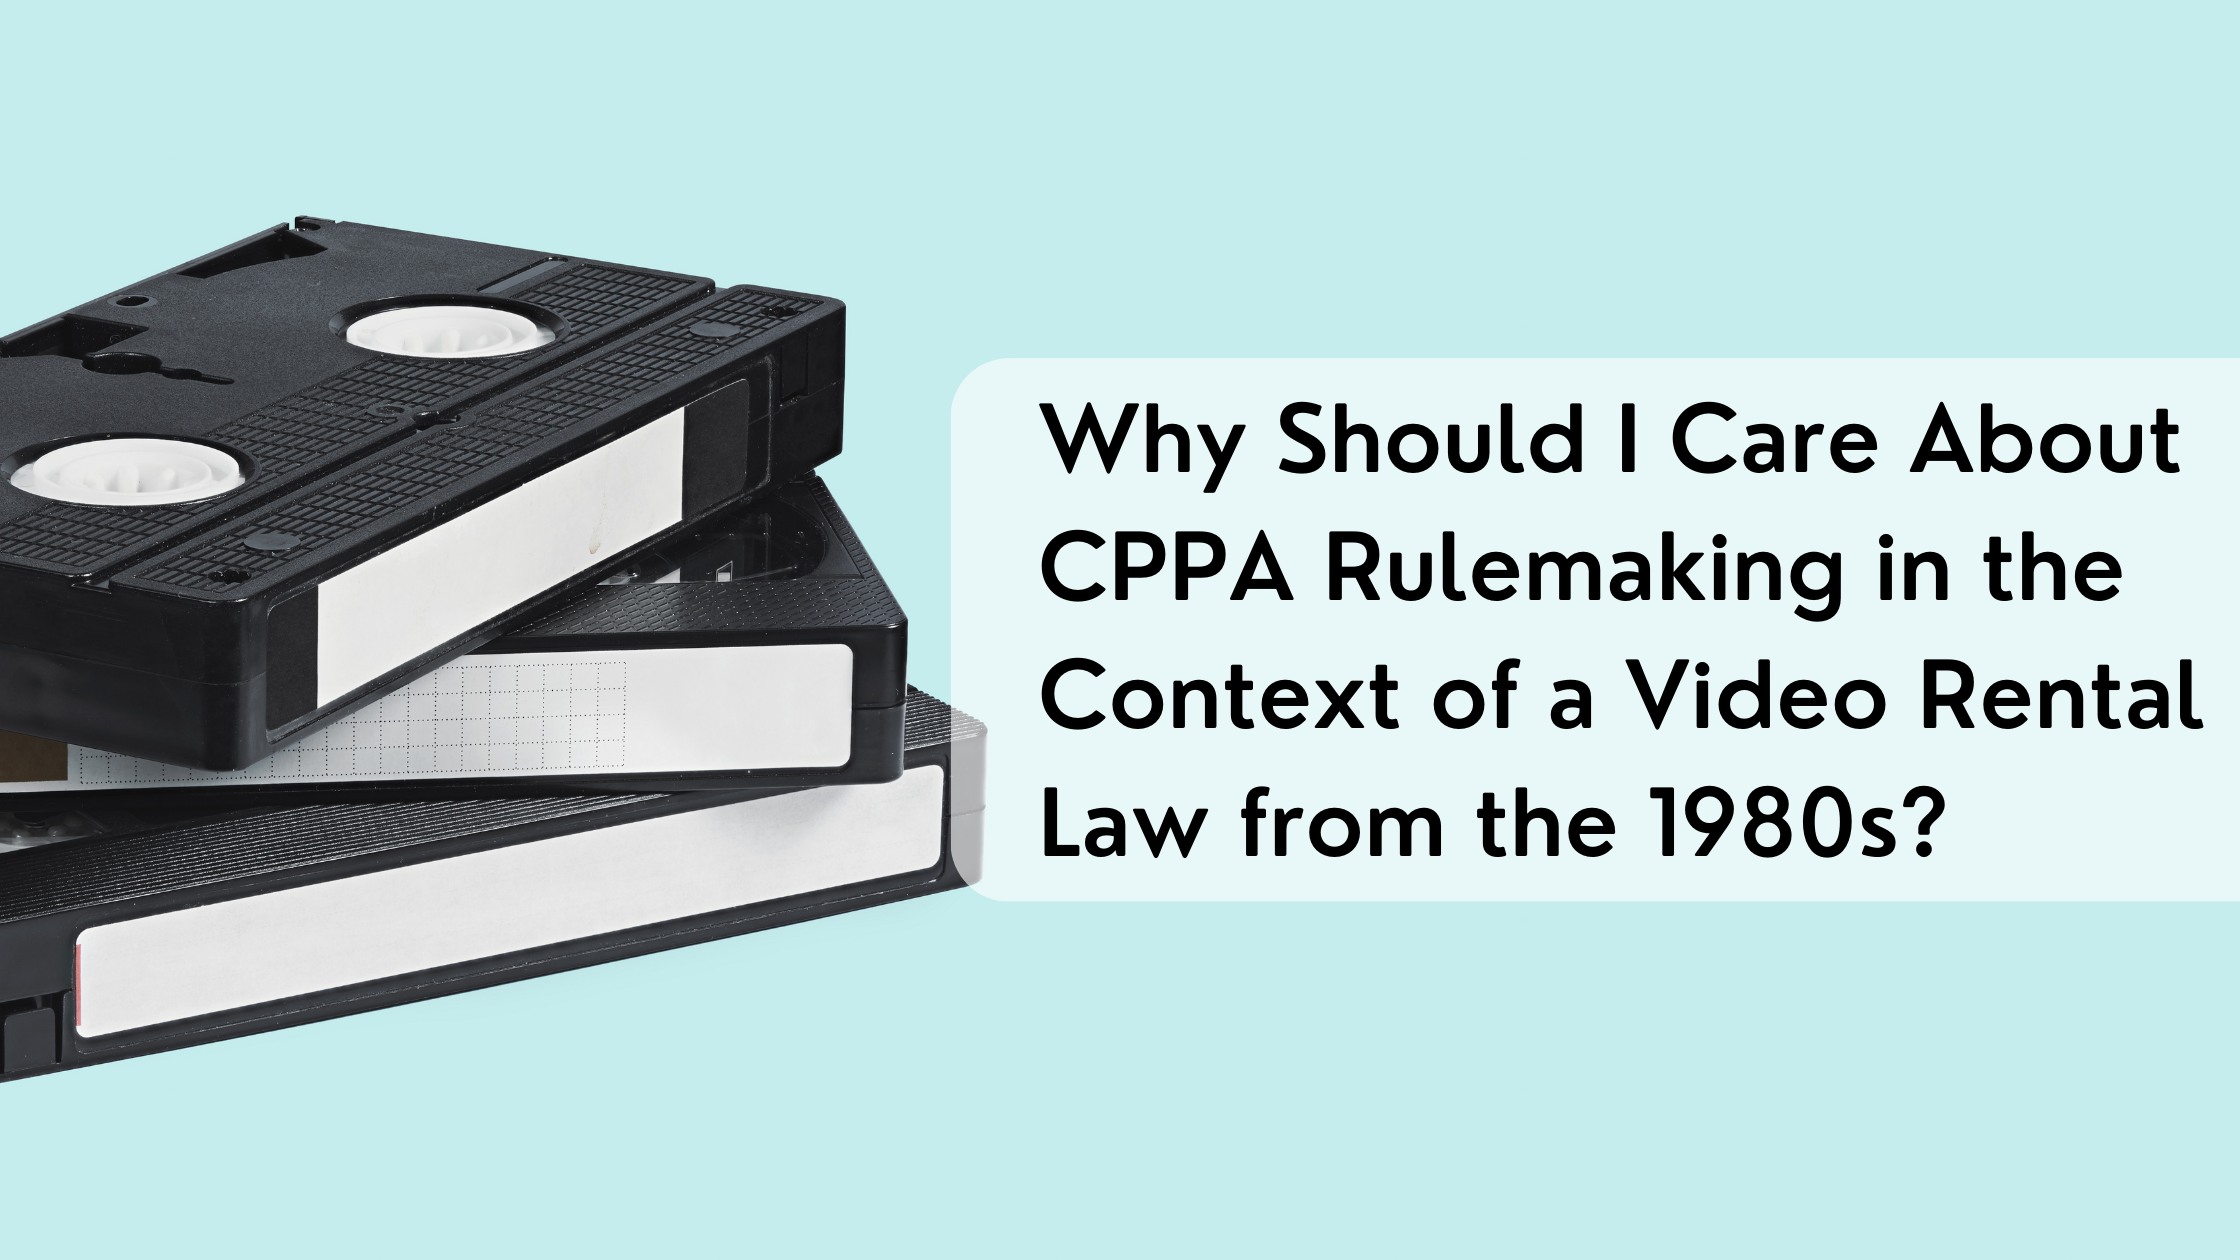 Why Should I Care About the CPPA Rulemaking in Context of a Video Rental Law from the 1980s?